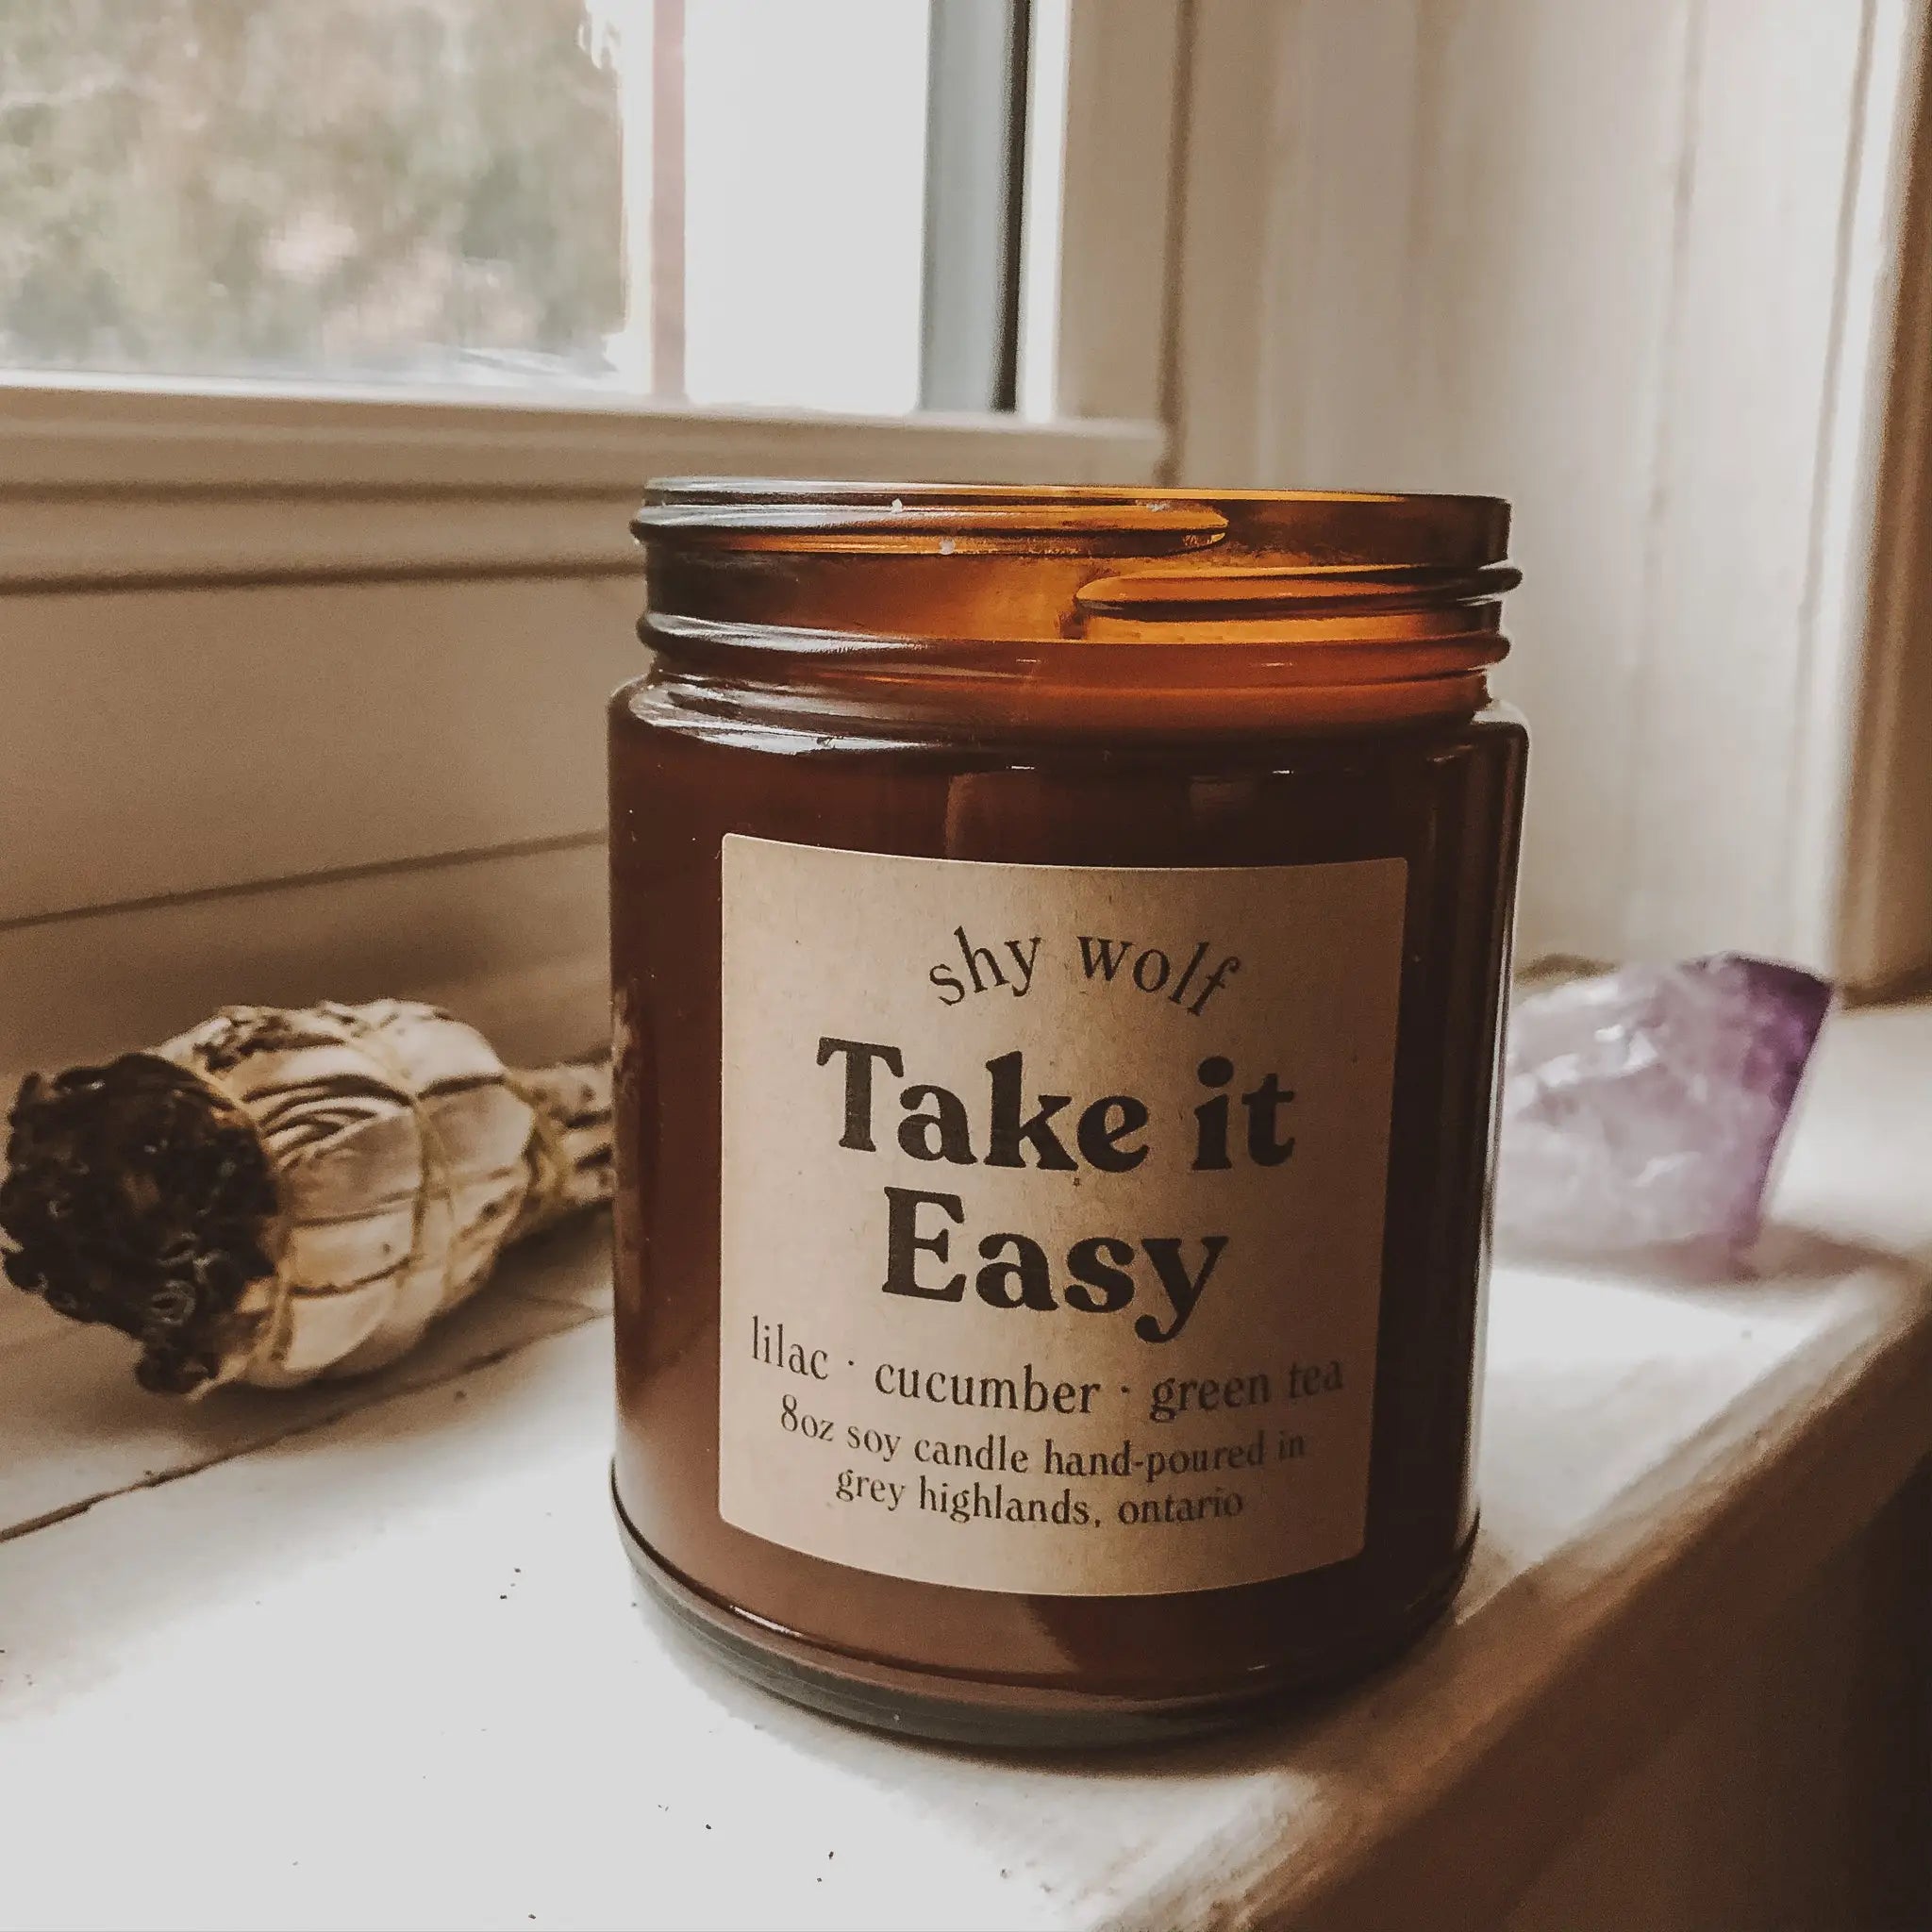 Take it Easy Soy Candle - Lilac, Cucumber, Green Tea